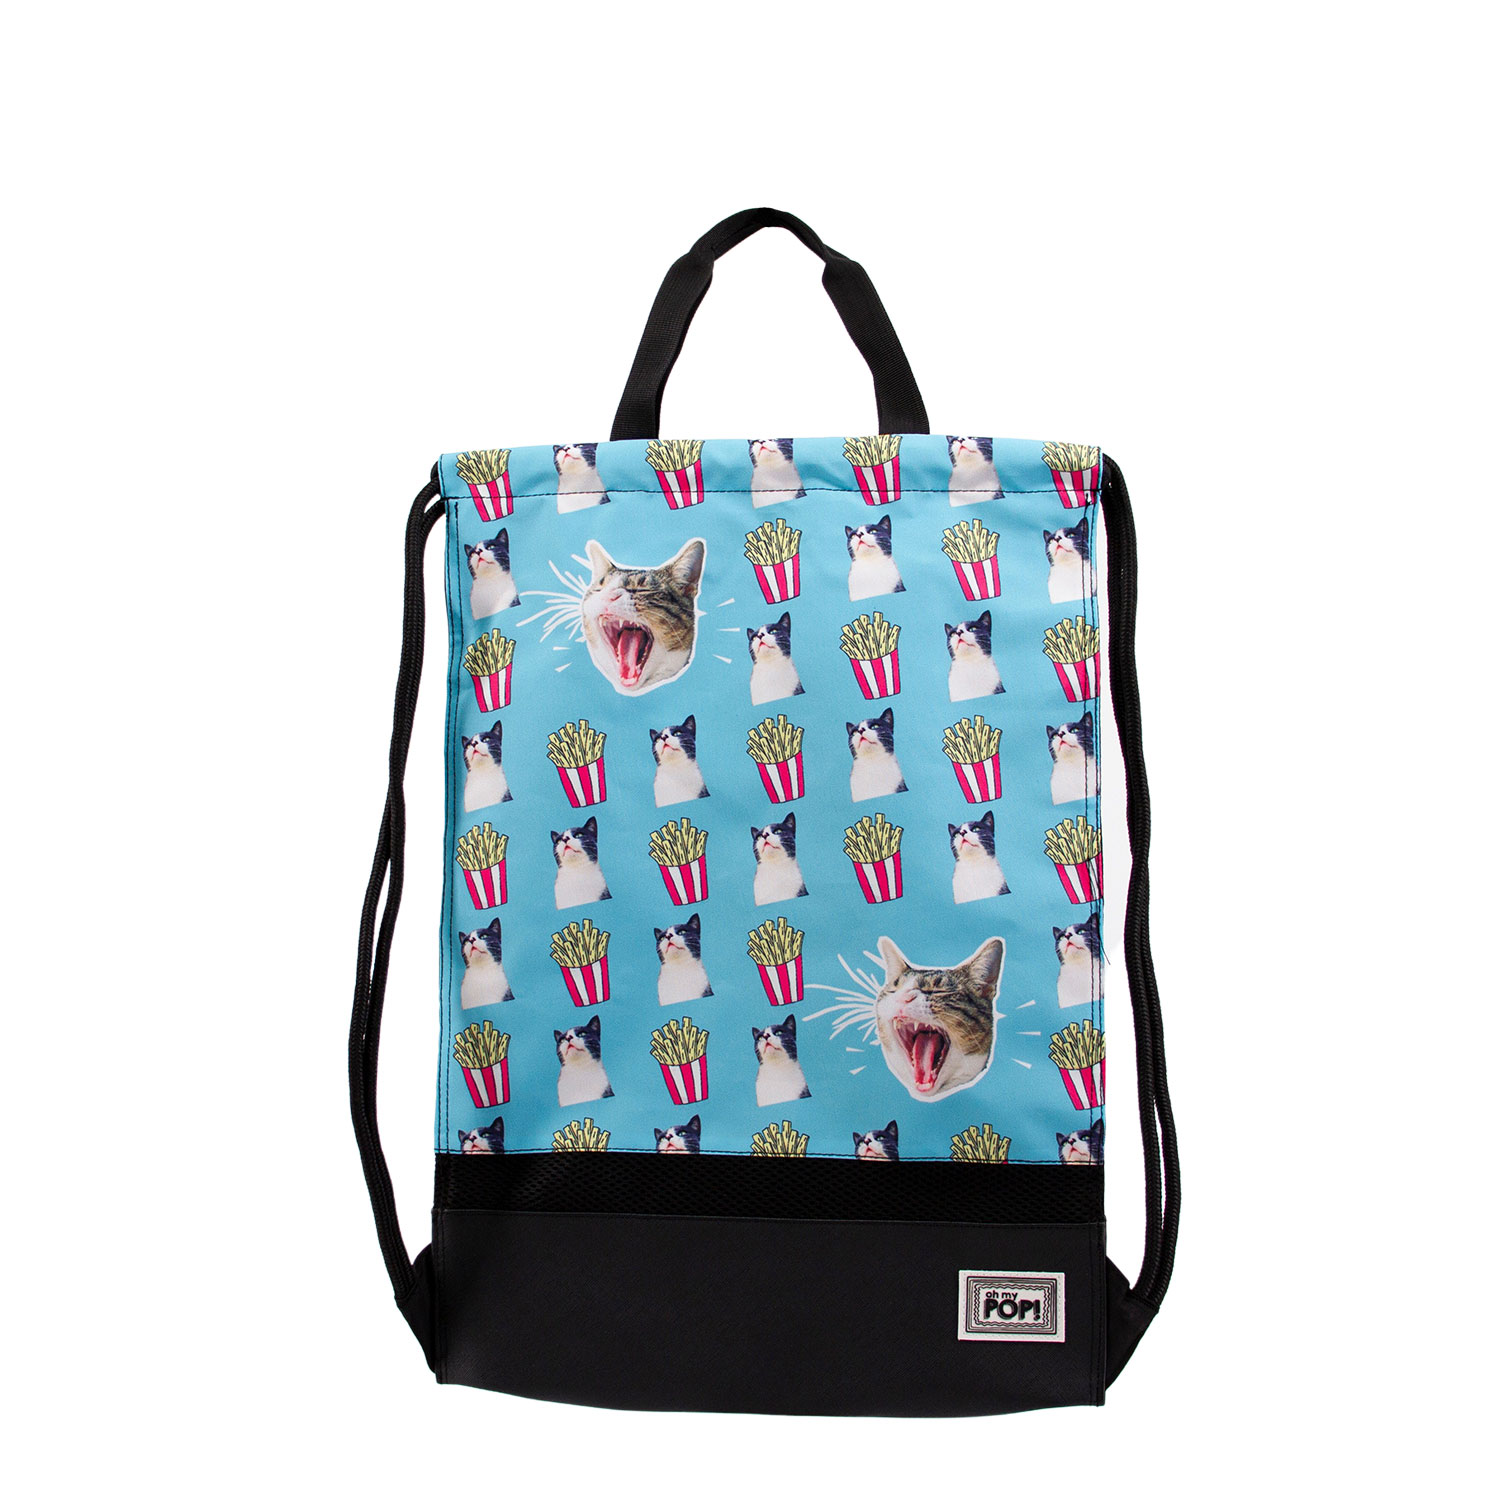 Storm Gymsack with Handles Oh My Pop! Angry Cat